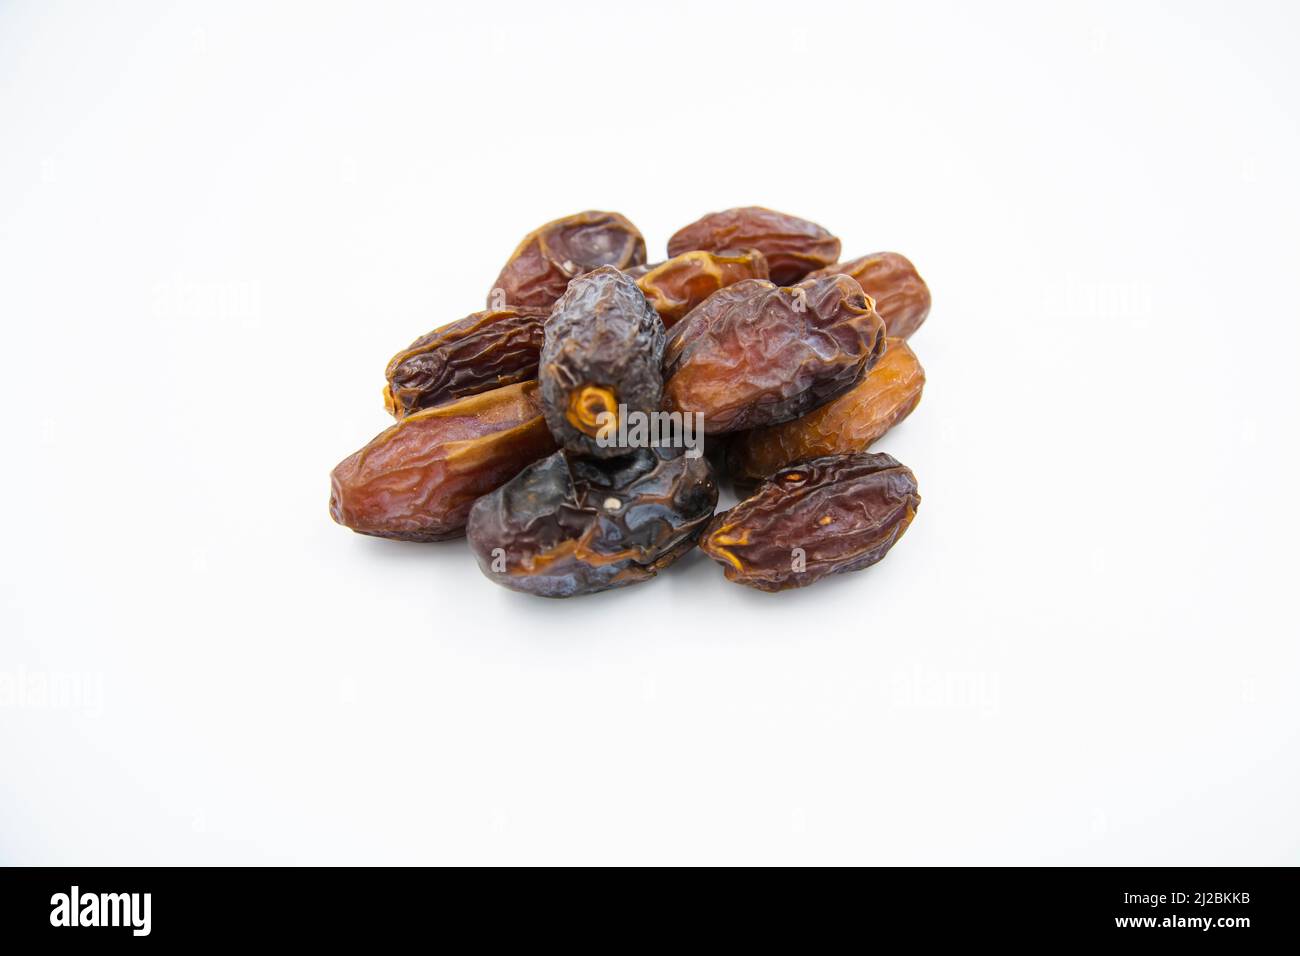 The most special fruit of the month of Ramadan, the date fruit Stock Photo